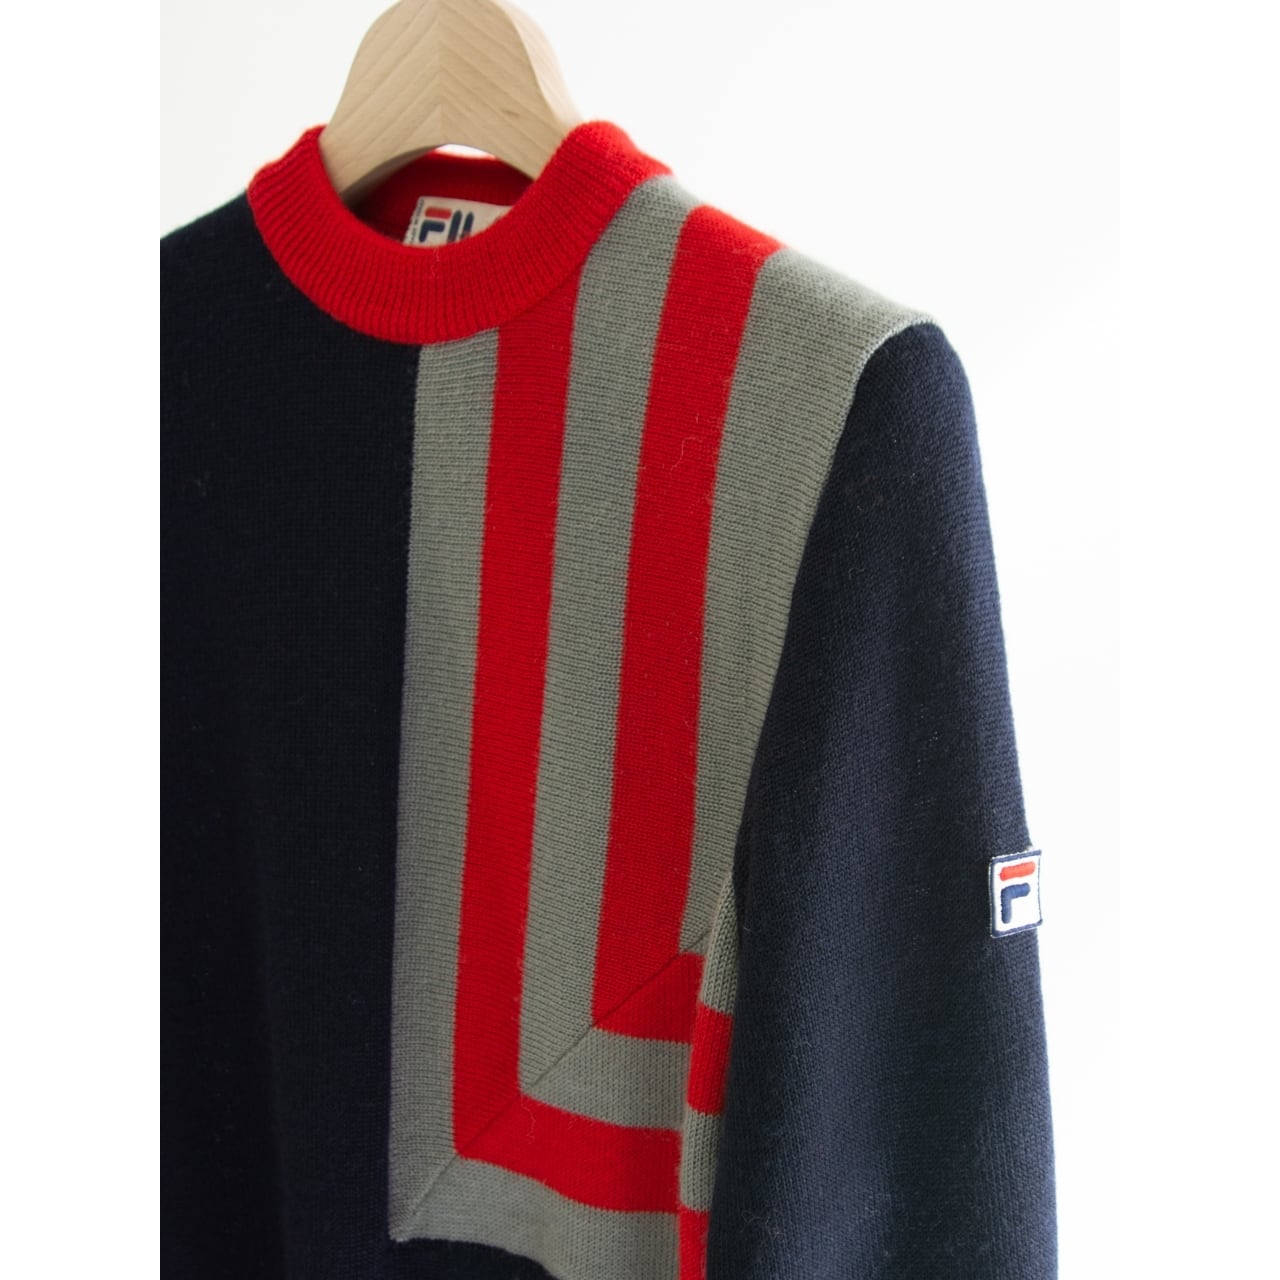 FILA】Made in Italy 70-80's 100% Wool Pullover Sweater（フィラ ...